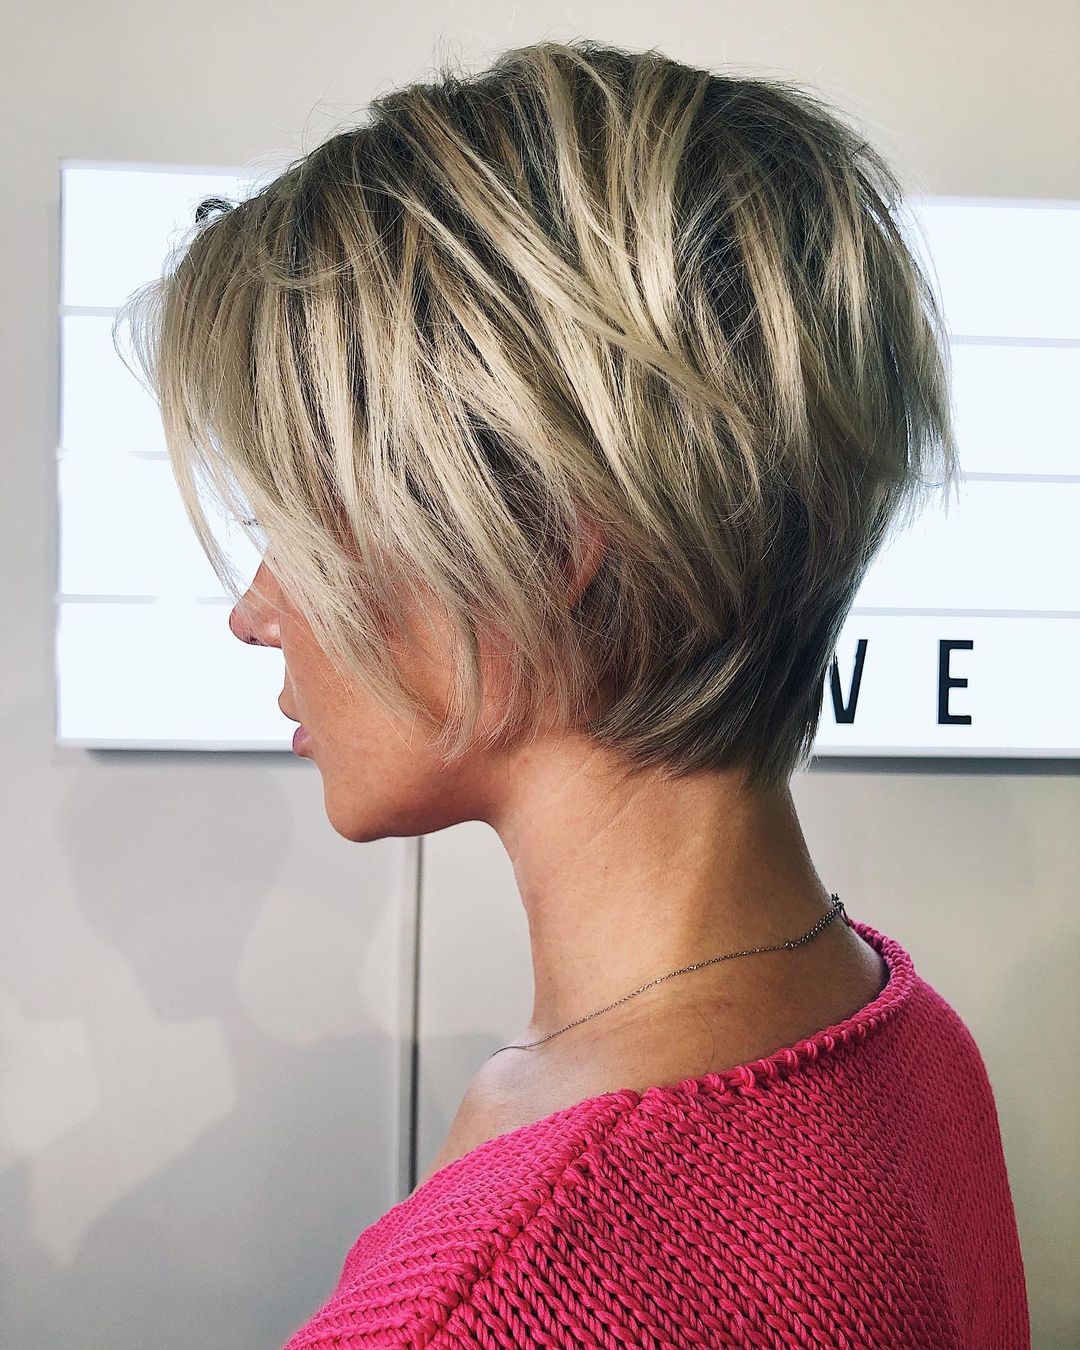 Stem haircuts on blond hair: 16 spectacular and trendy examples